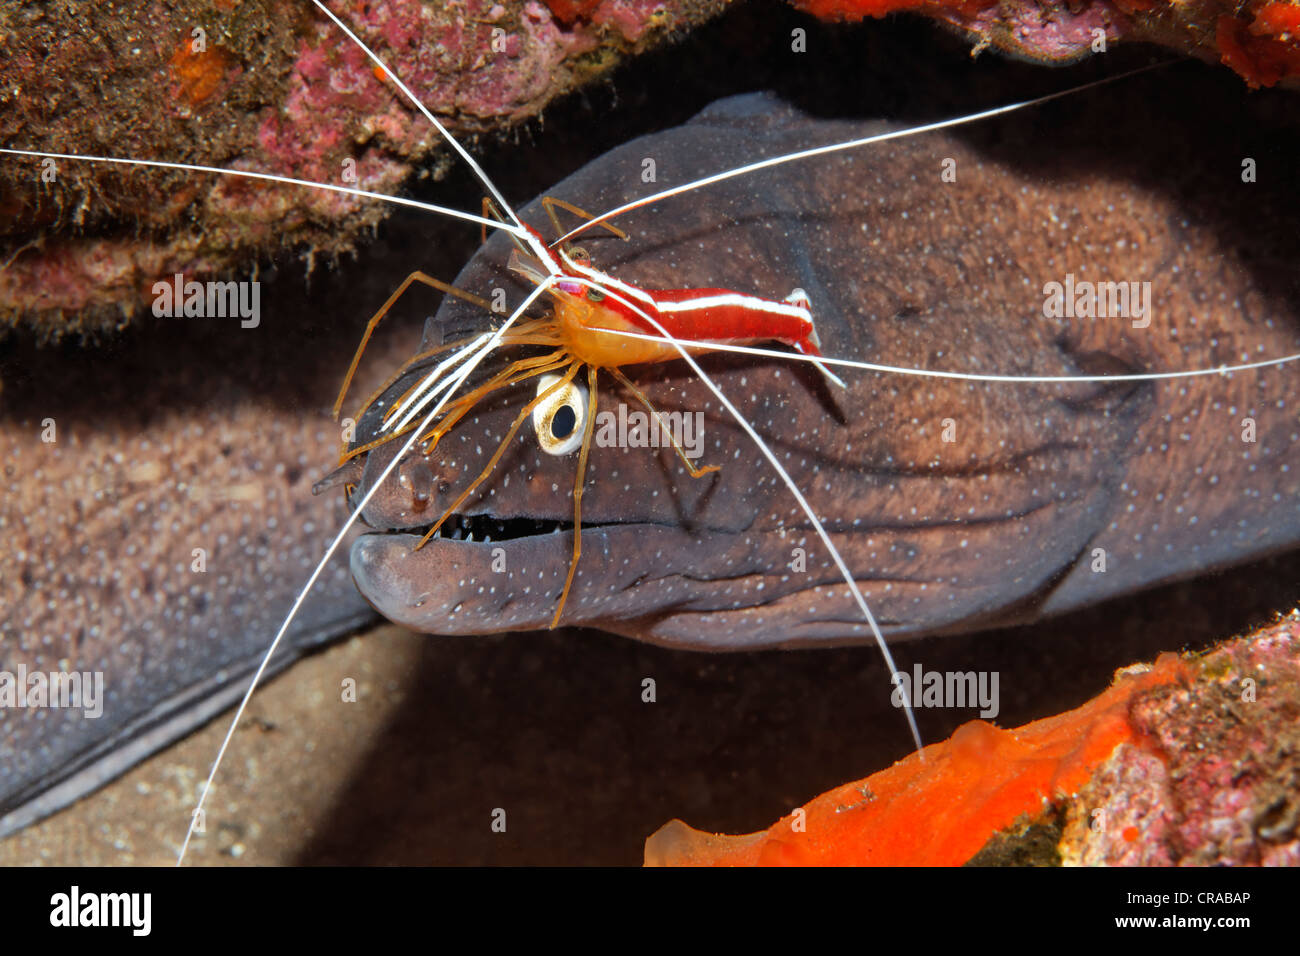 Dotted moray or Moray Eel (Muraena augusti) with Cleaner Shrimp (Lysmata grabhami) in its hideout, Madeira, Portugal, Europe Stock Photo